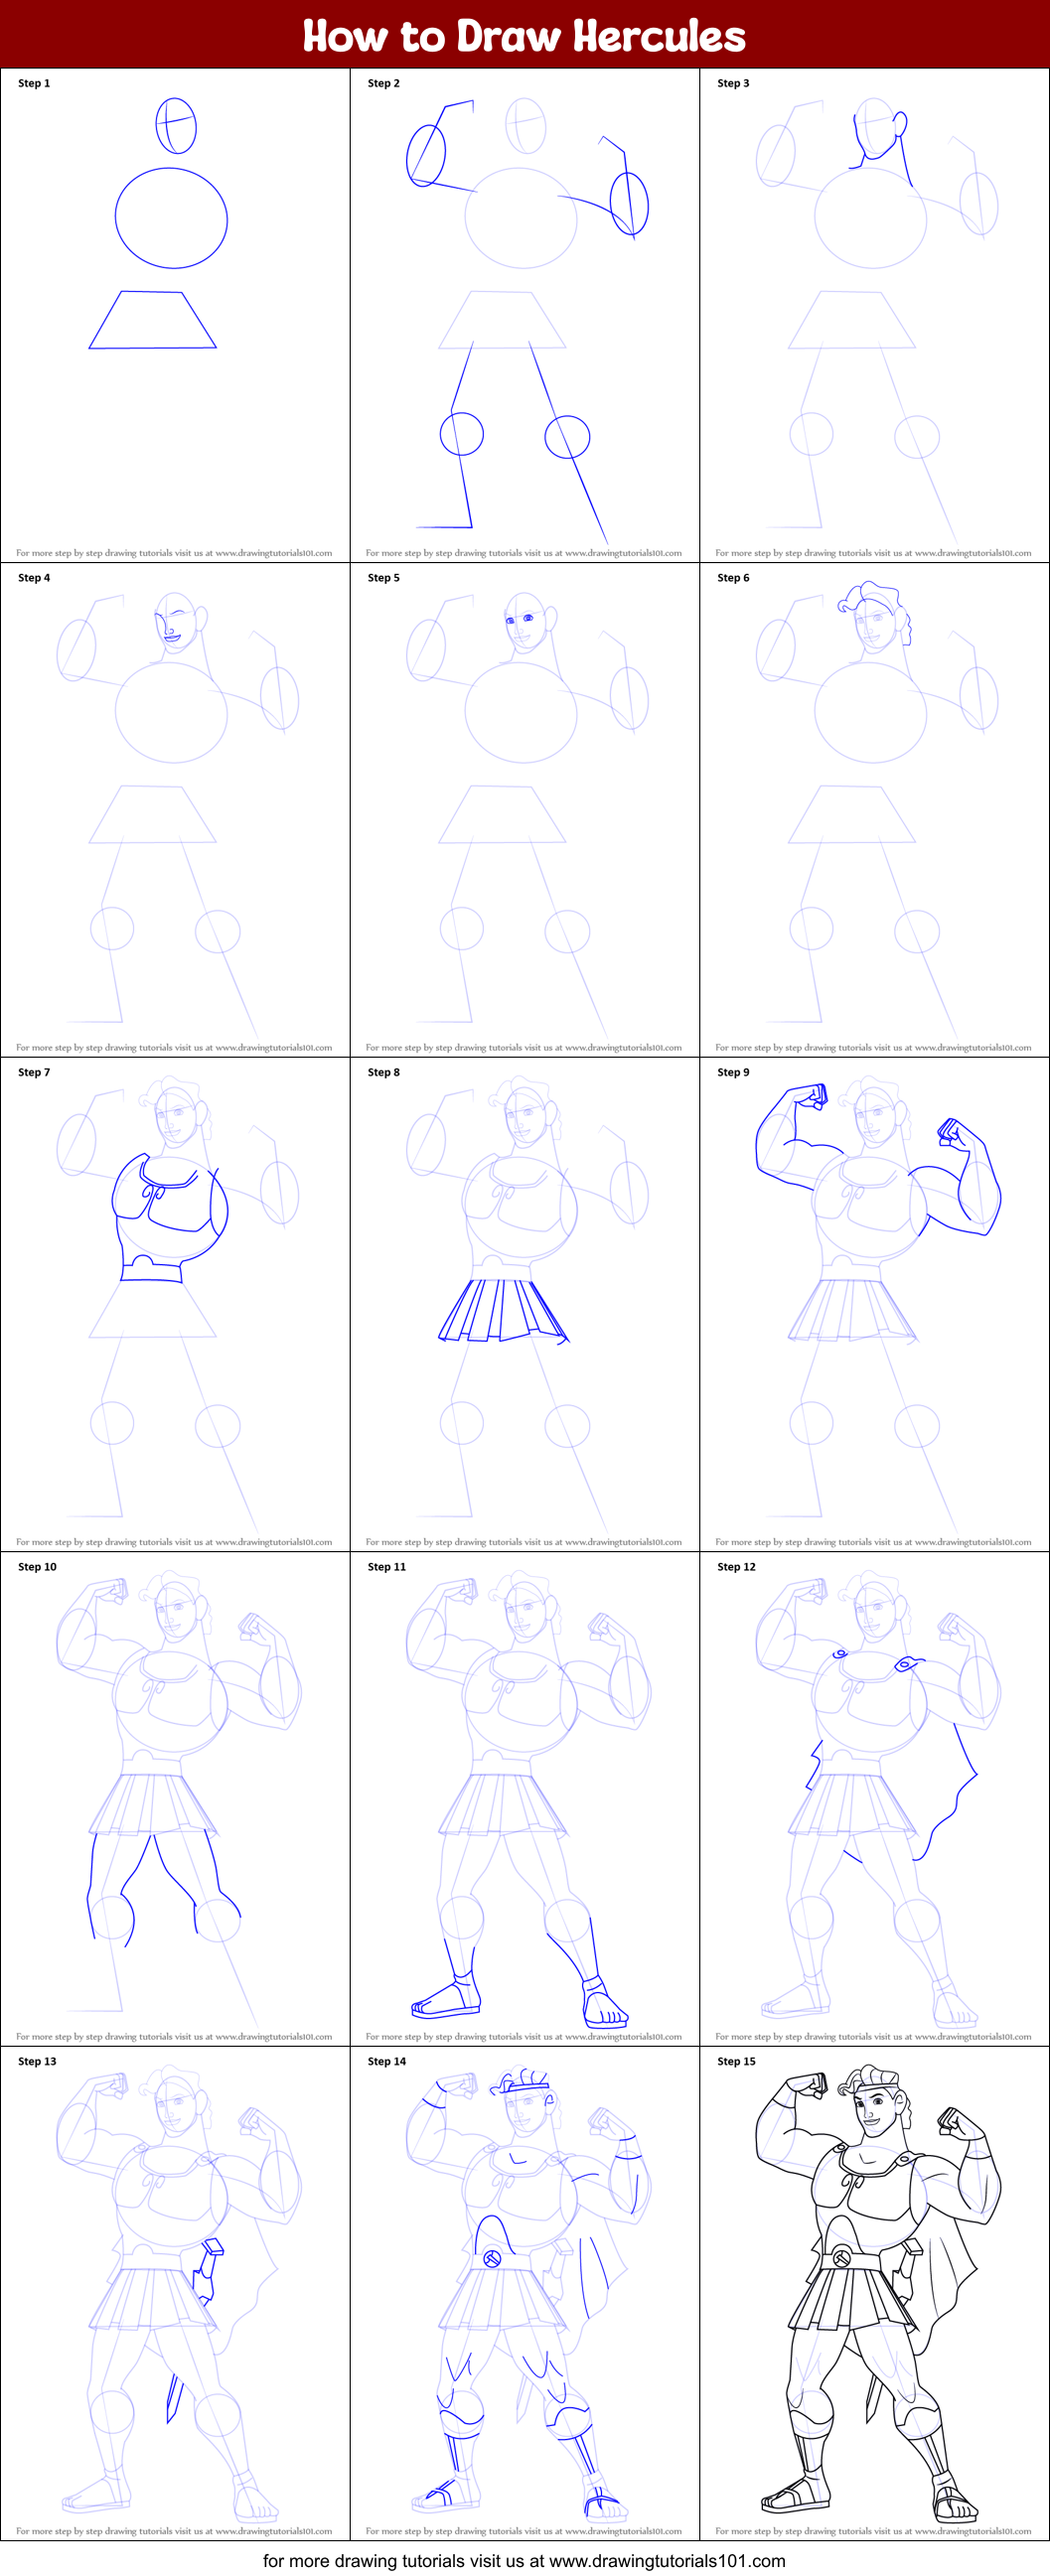 How to Draw Hercules printable step by step drawing sheet